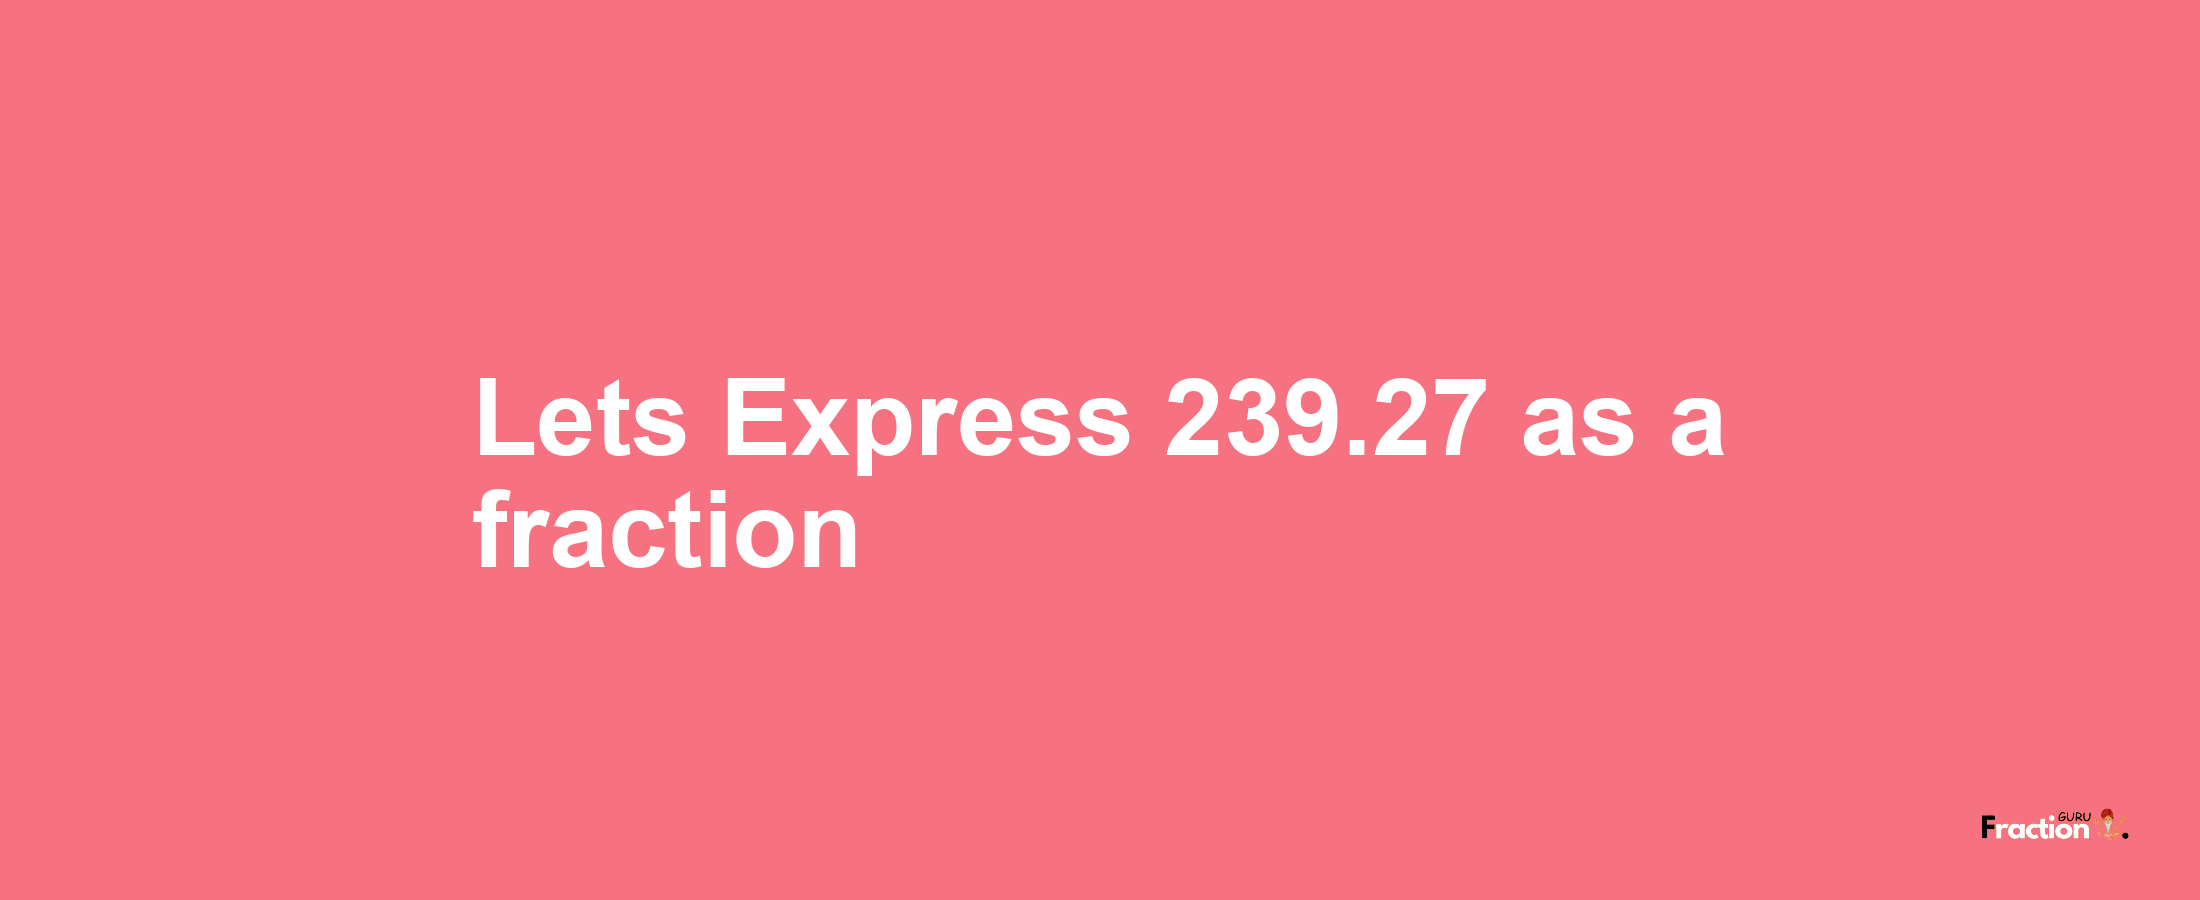 Lets Express 239.27 as afraction